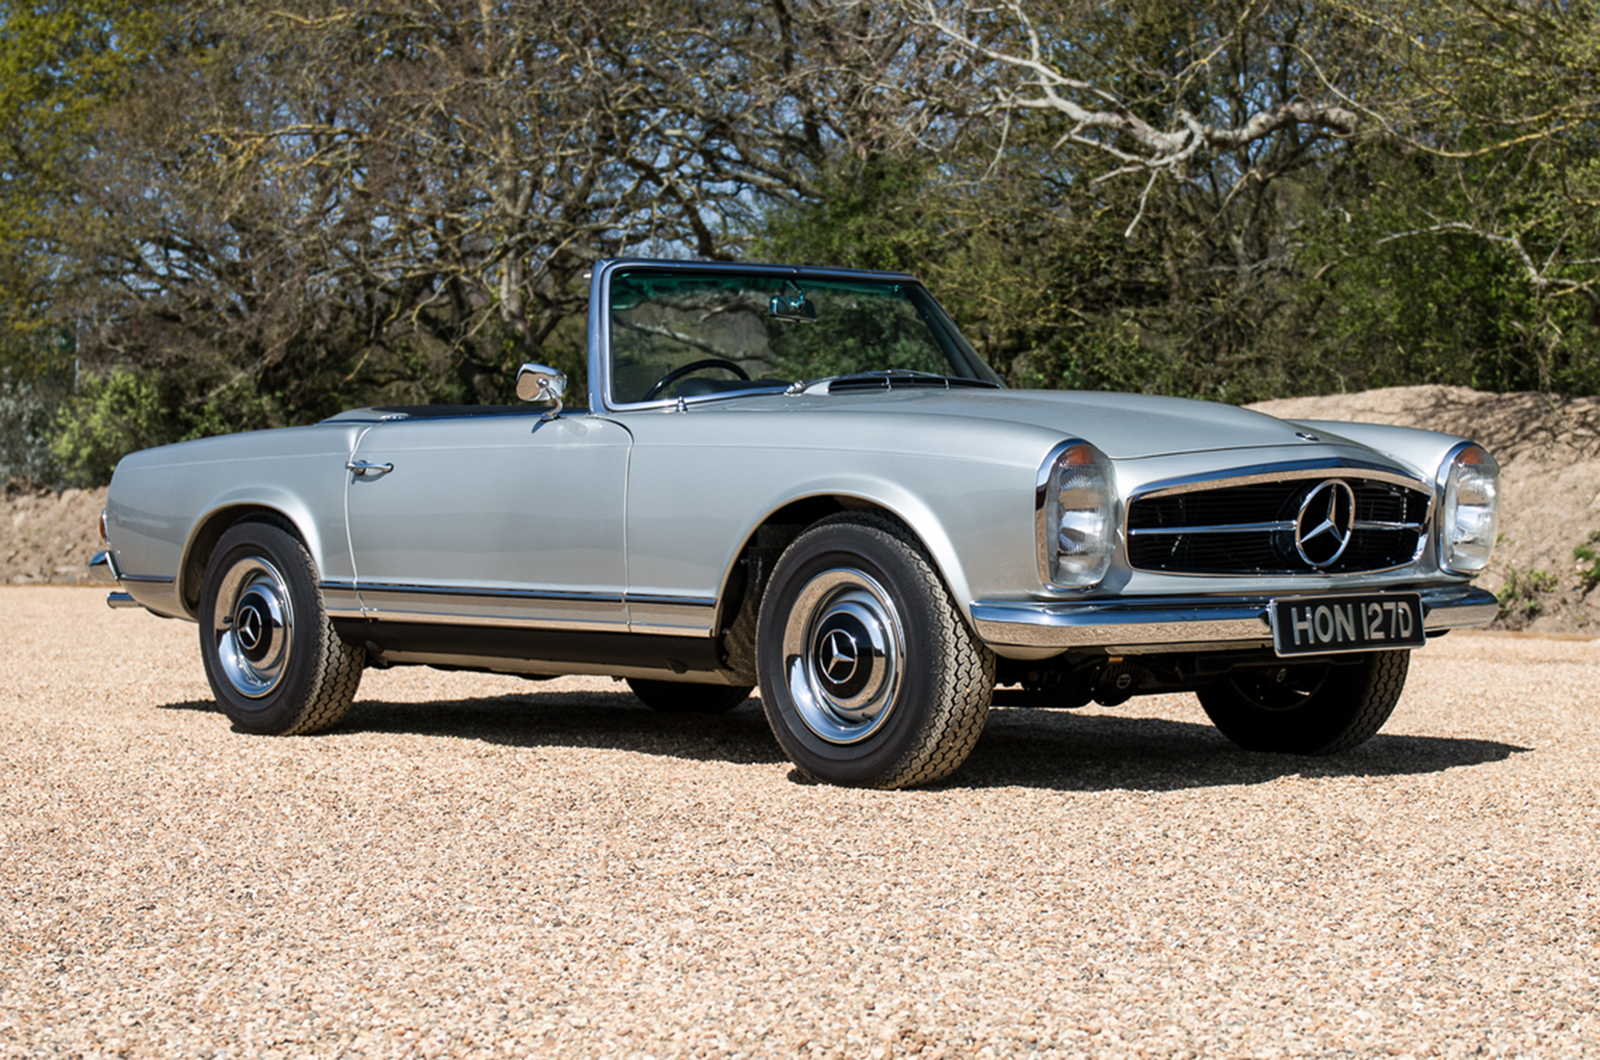 Daytona and Iso Grifo top dual Silverstone auctions